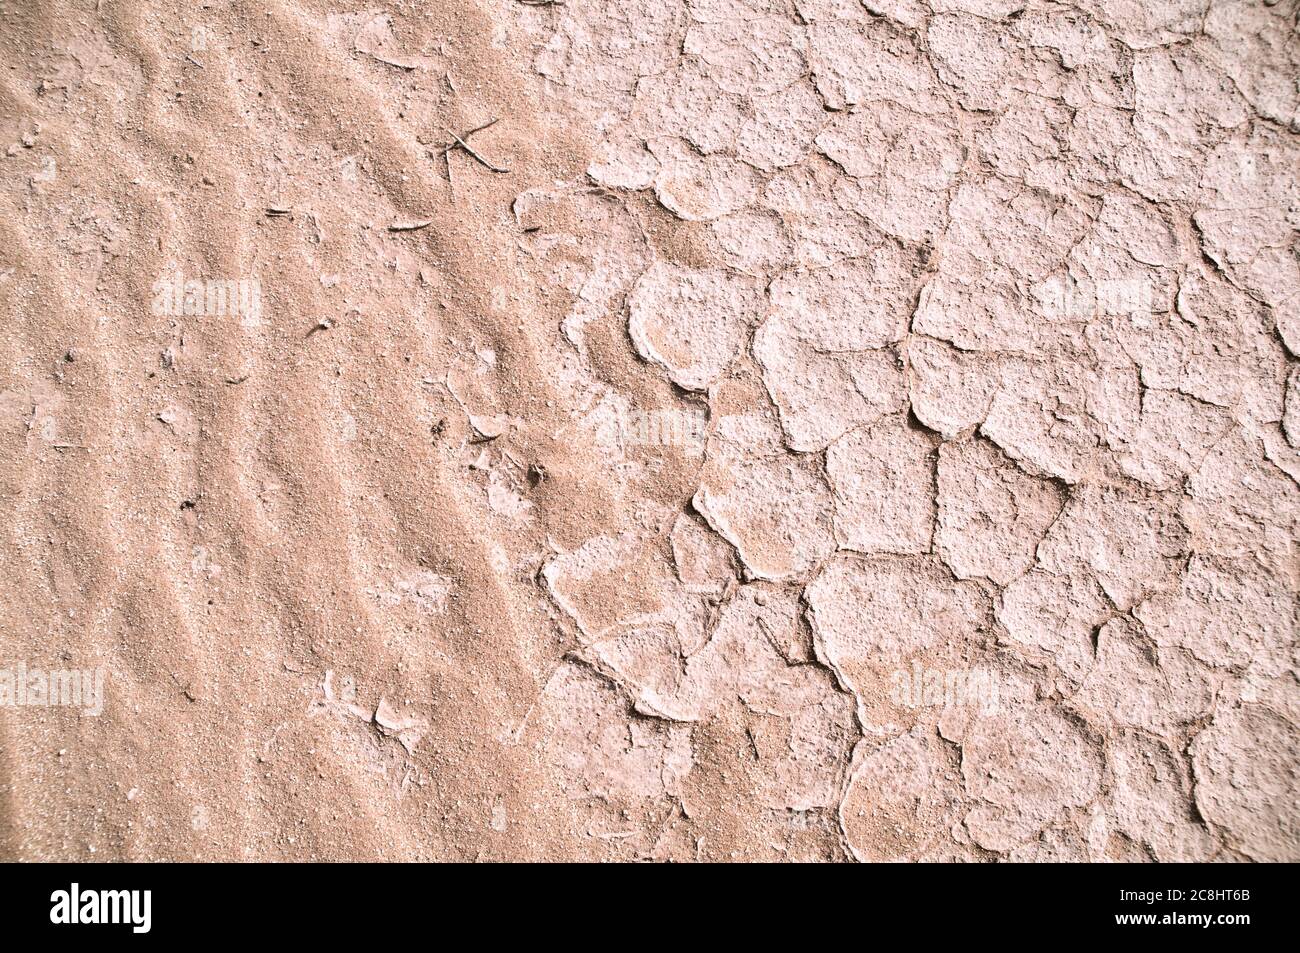 Dry, parched and cracked white mud patterns in the eastern desert of the Badia region, Wadi Dahek, Hashemite Kingdom of Jordan. Stock Photo